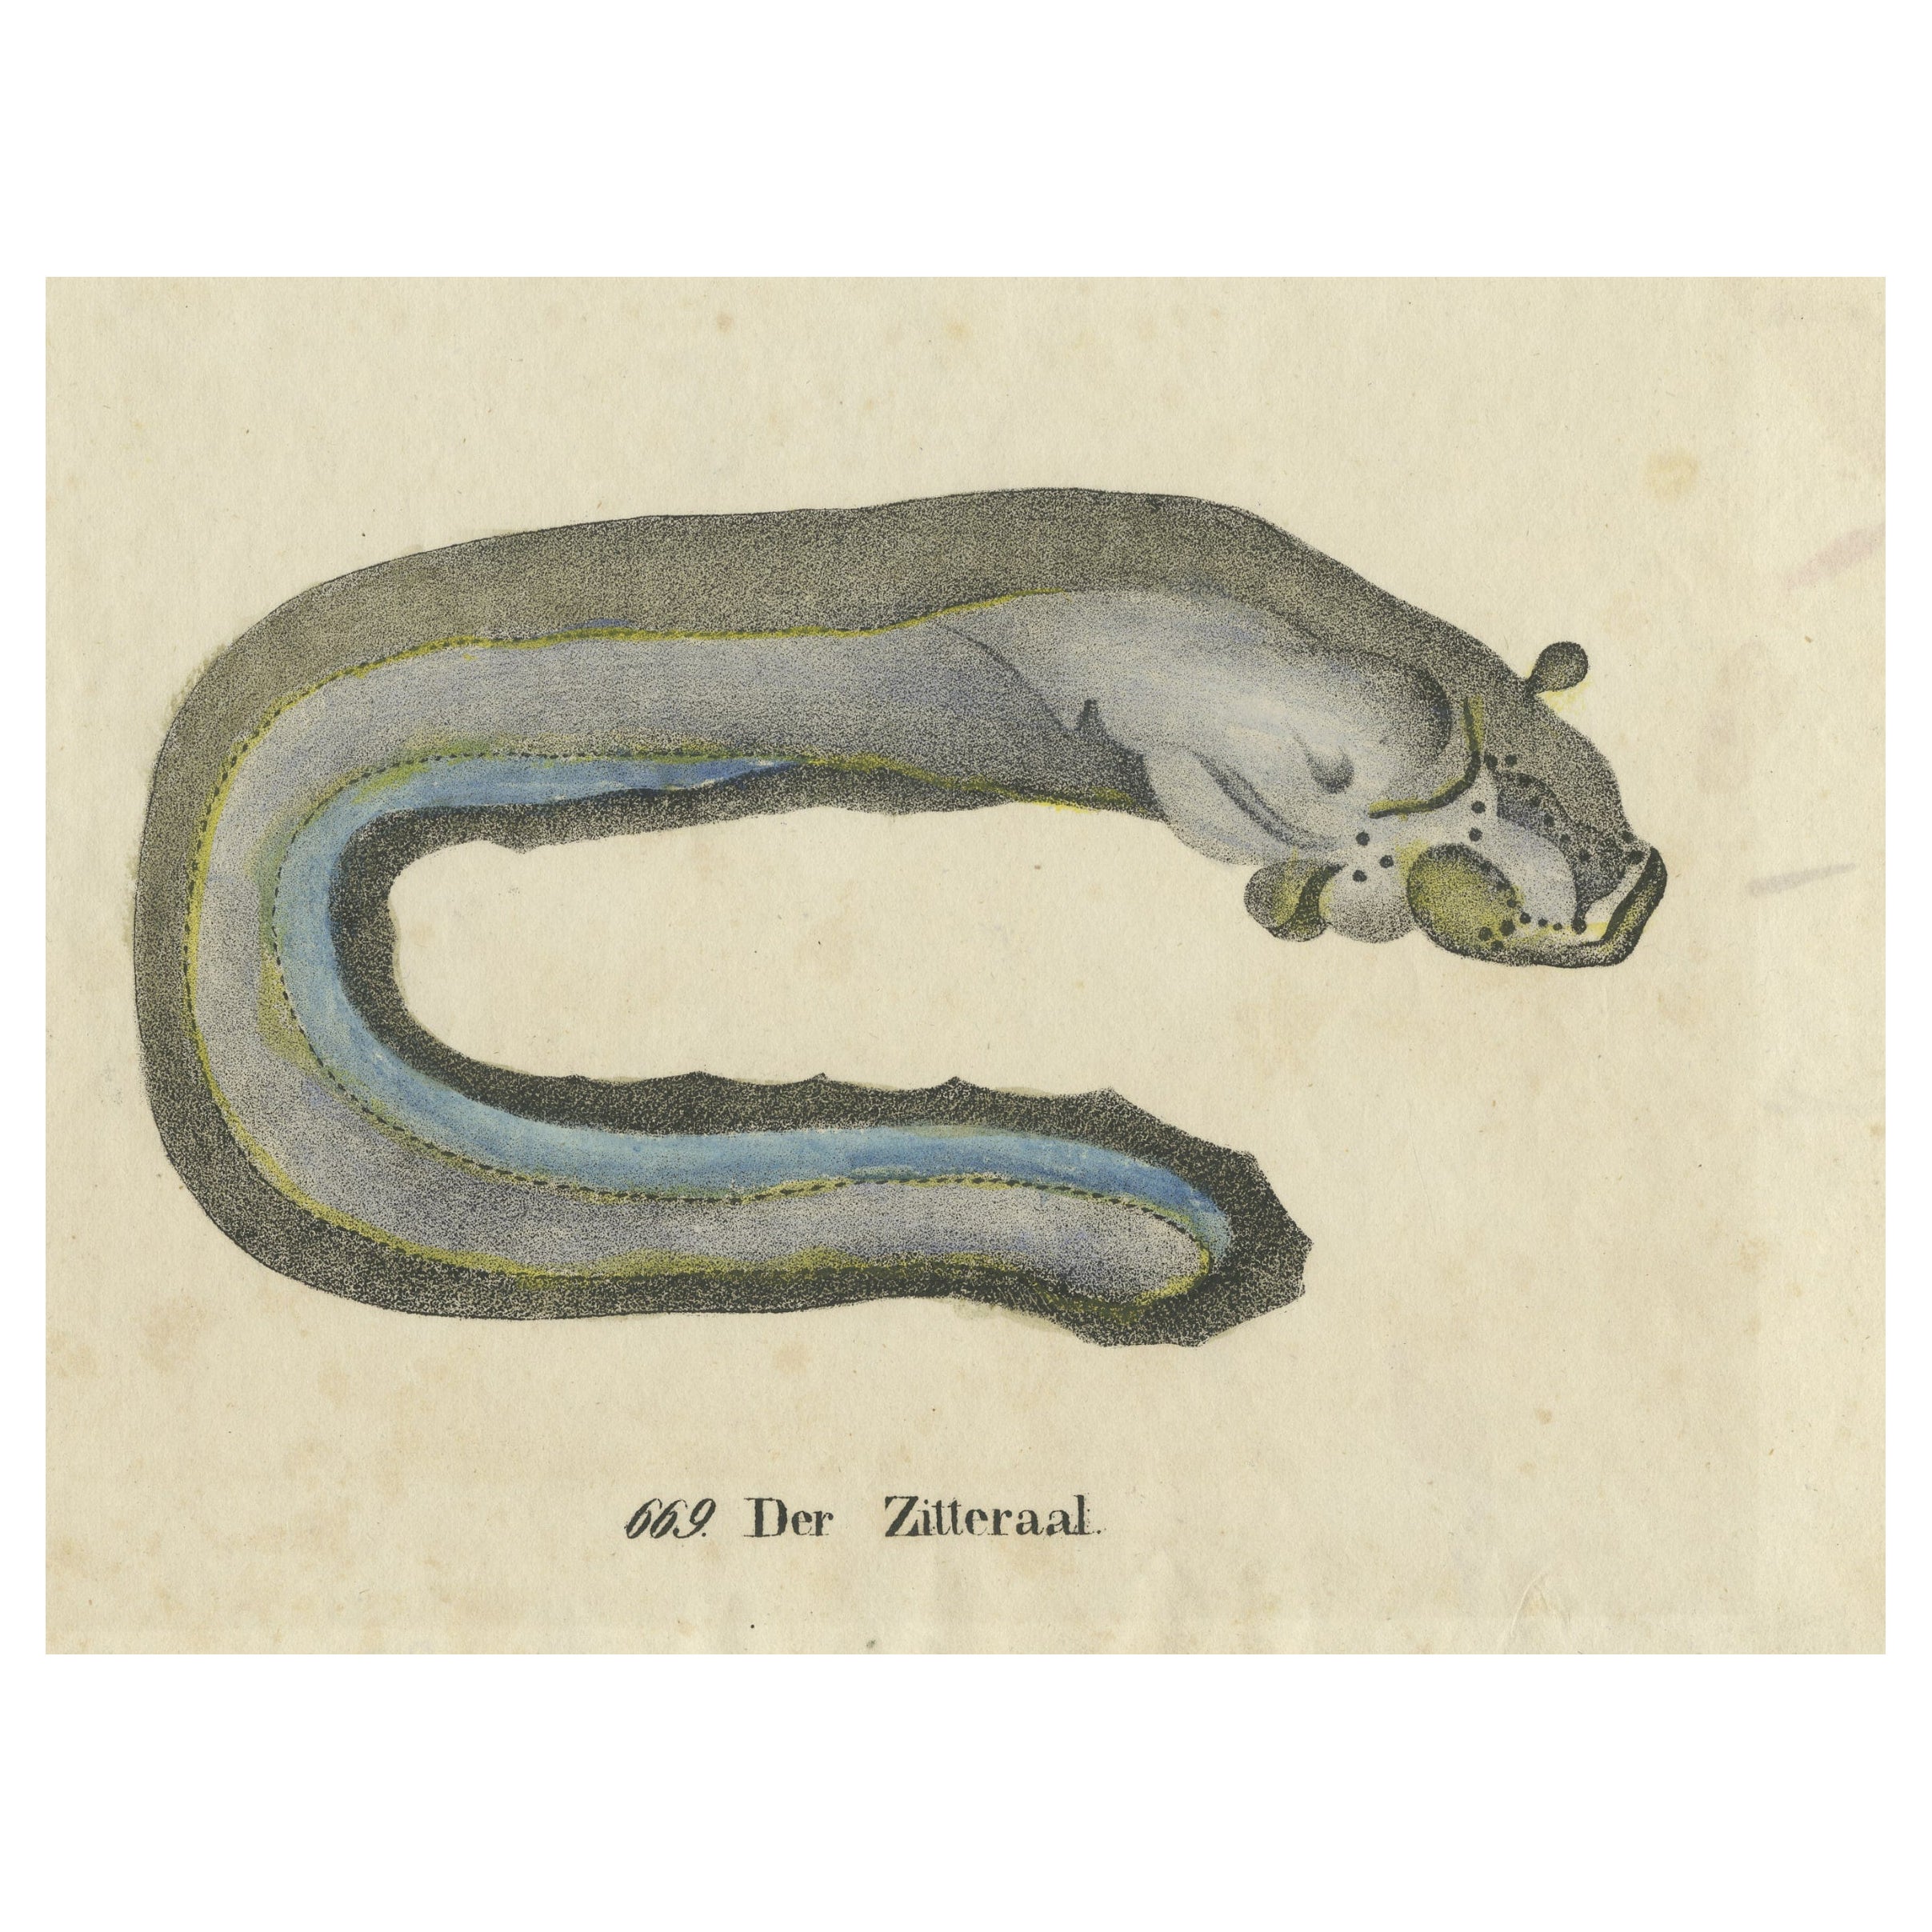 Original Antique Print of an Electric Eel For Sale